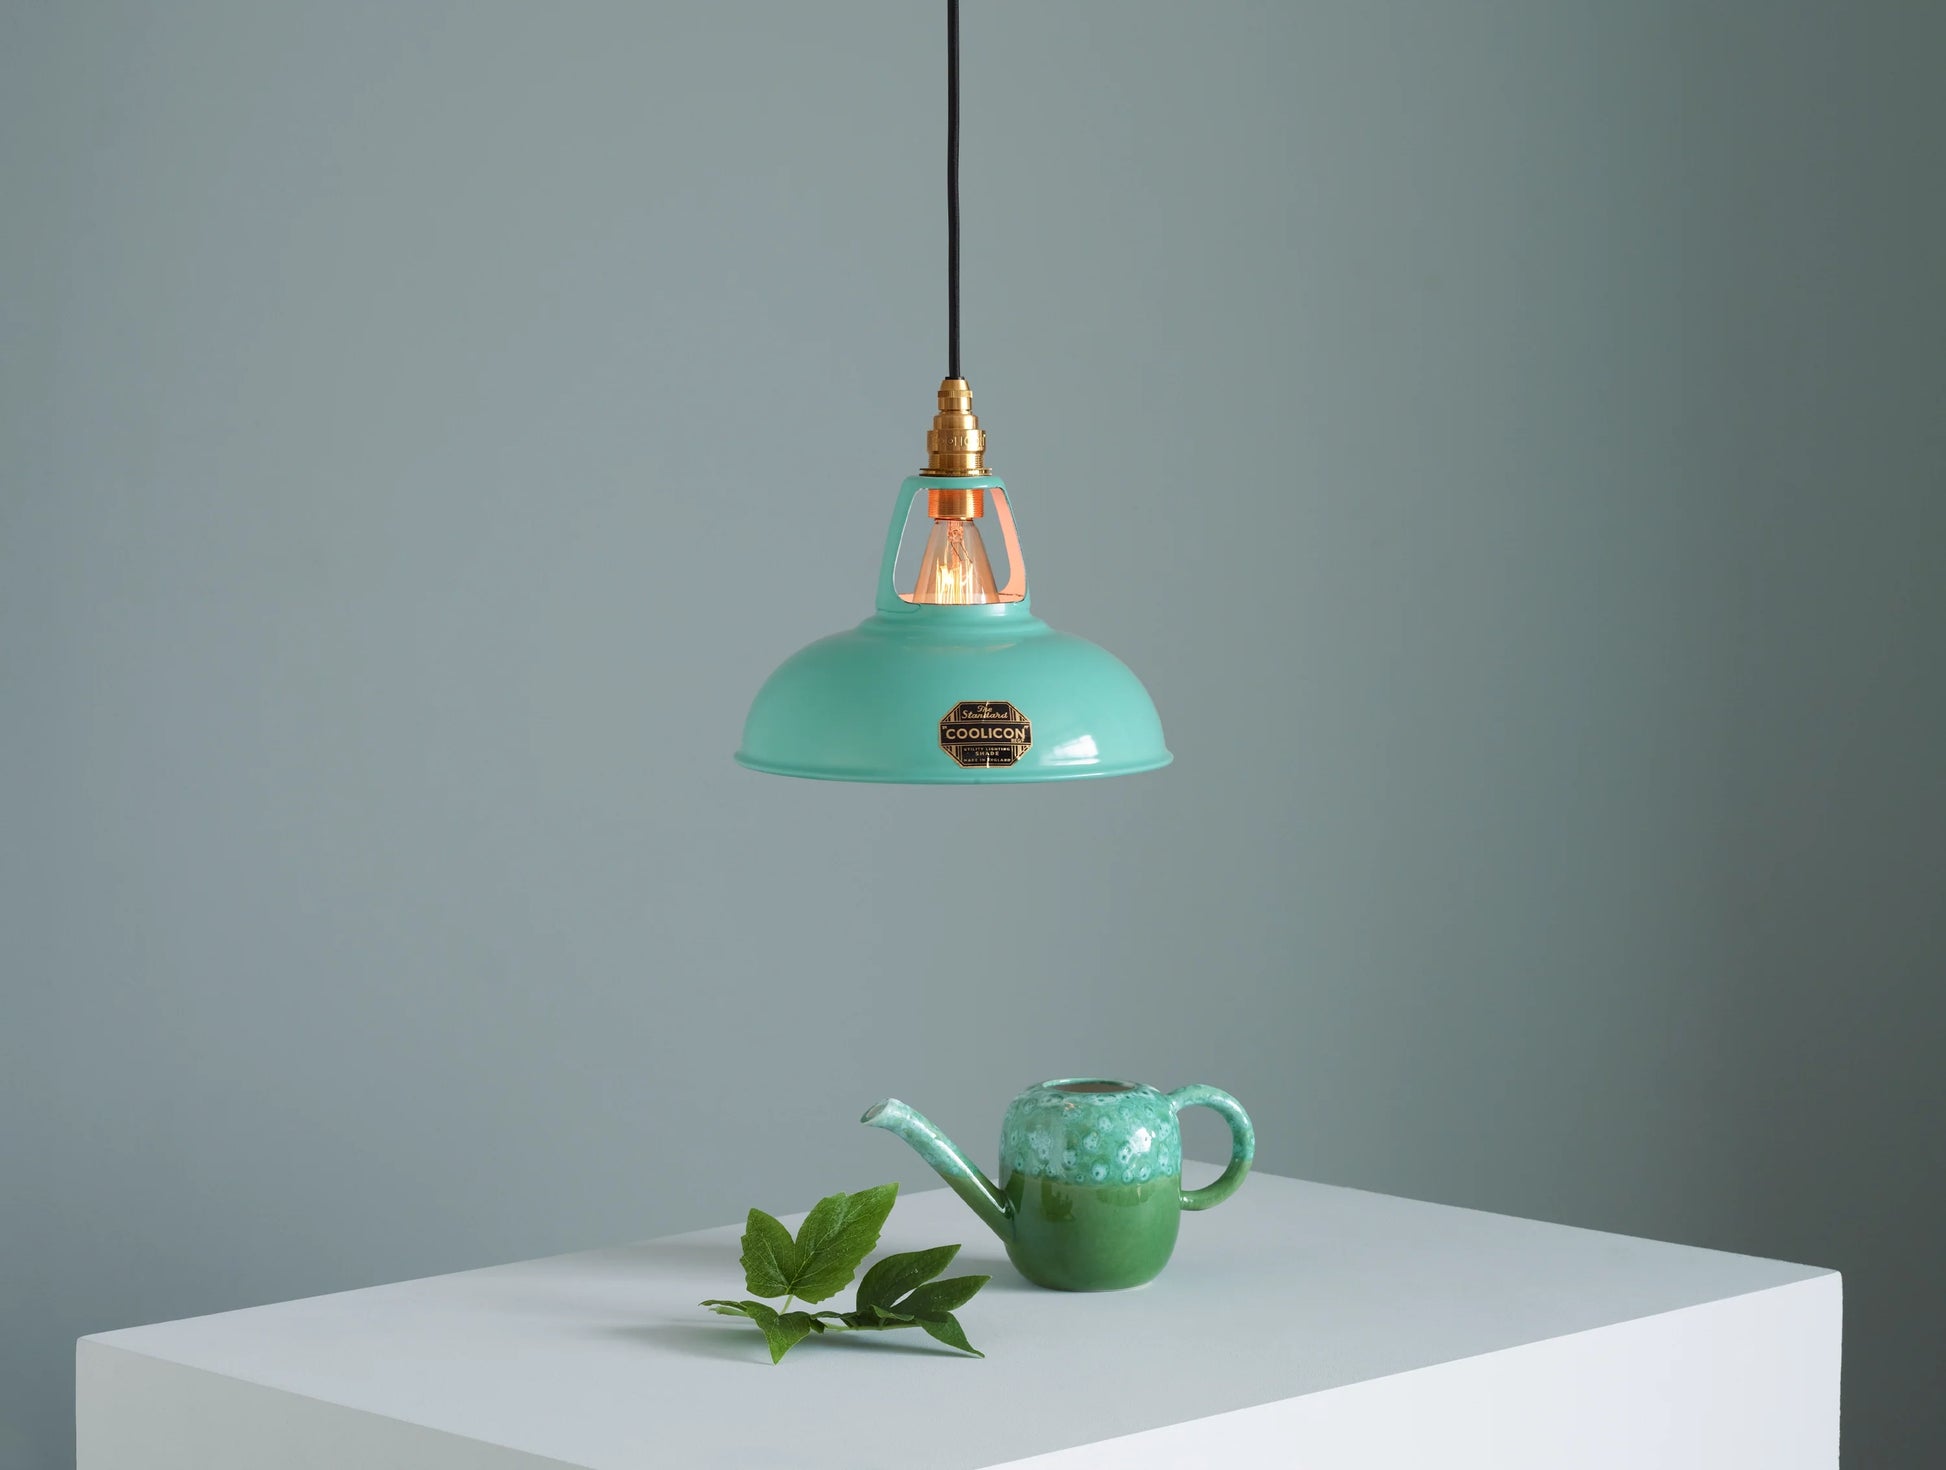 A Coolicon Fresh Teal lampshade hanging over a plinth. Below the shade is a large teal teapot and a branch with green leaves